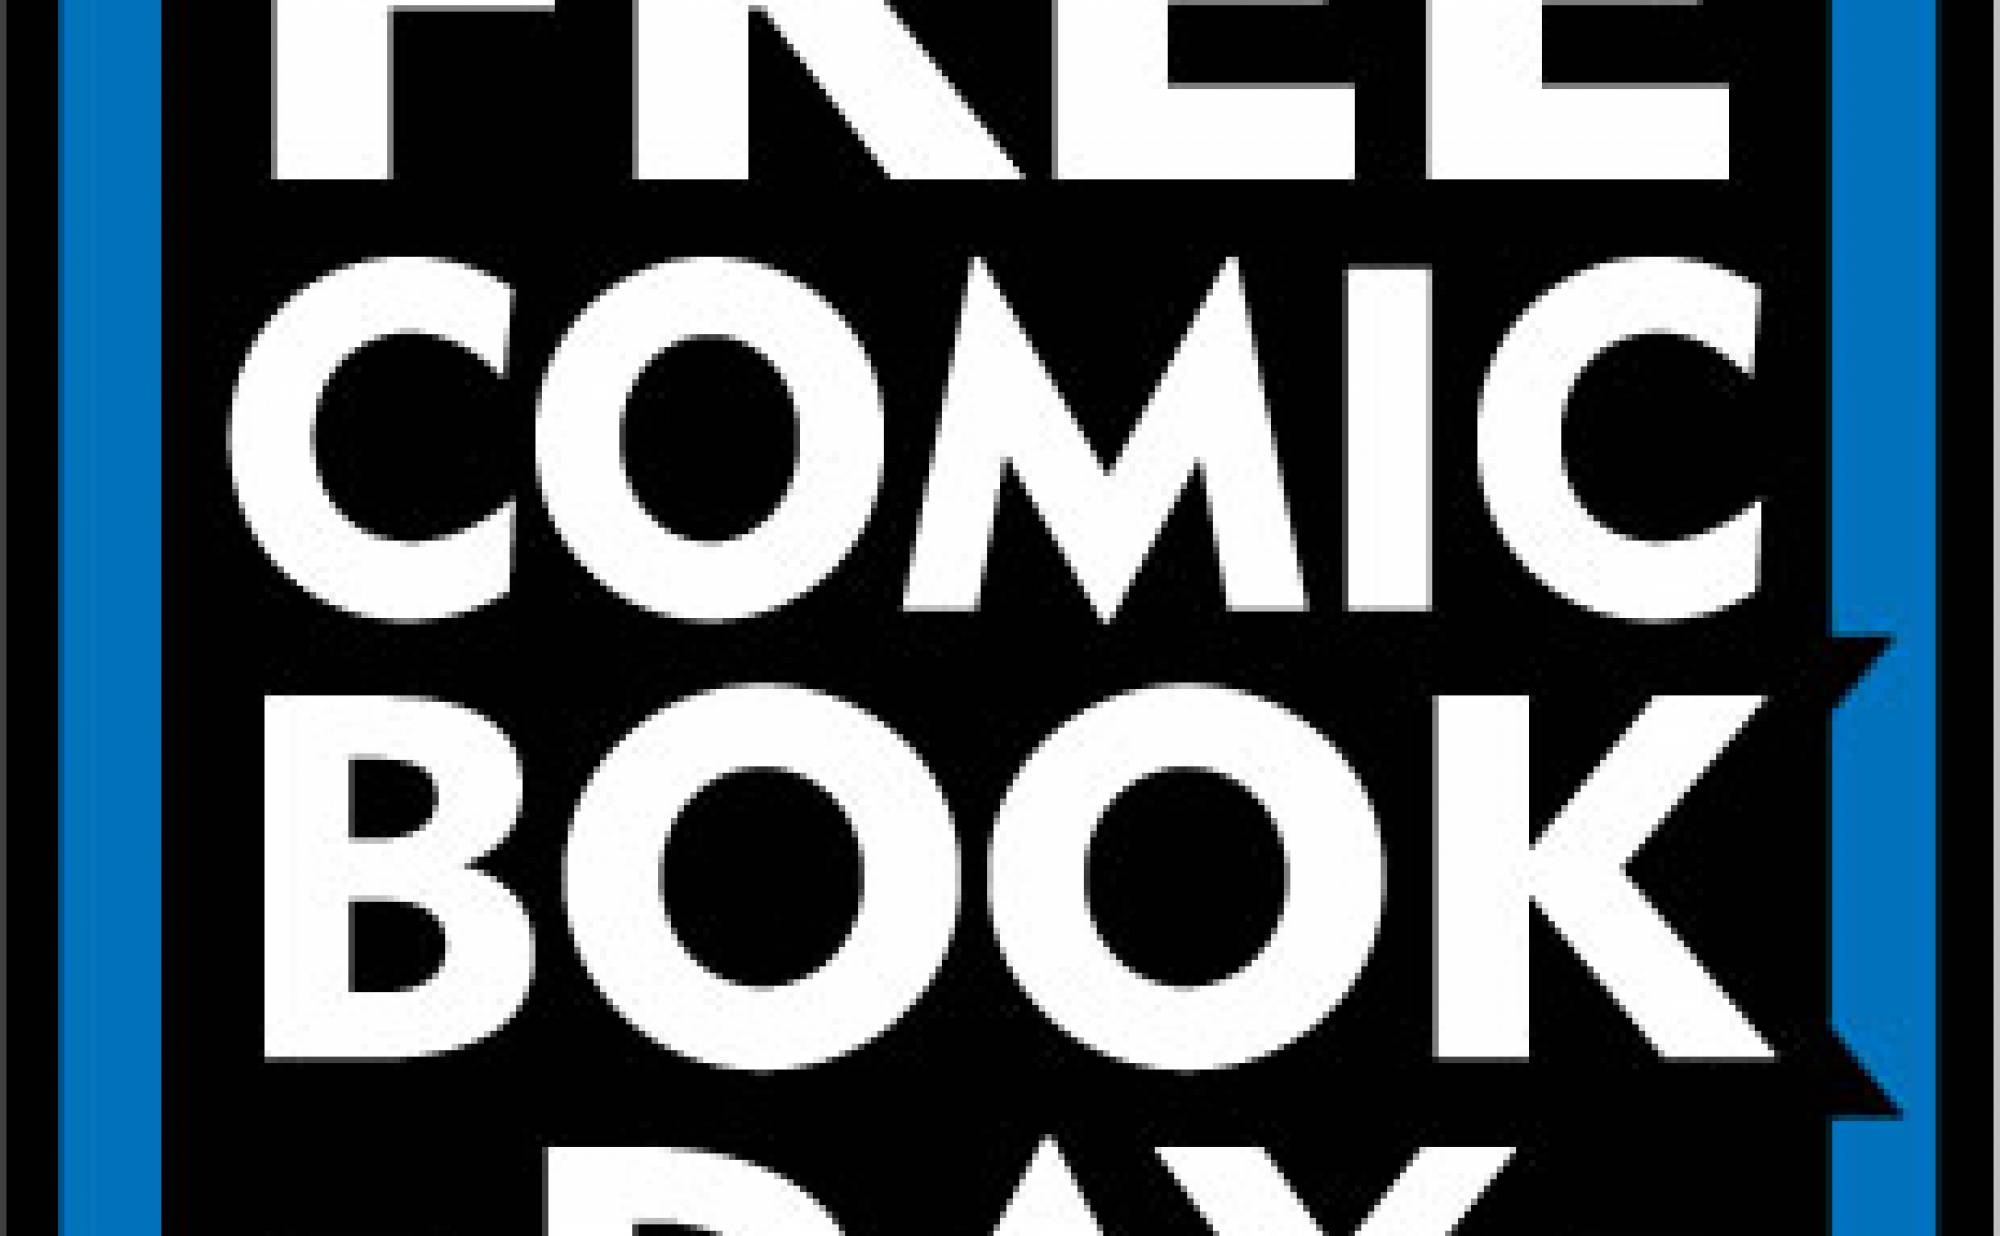 May 2nd is Free Comic Book Day